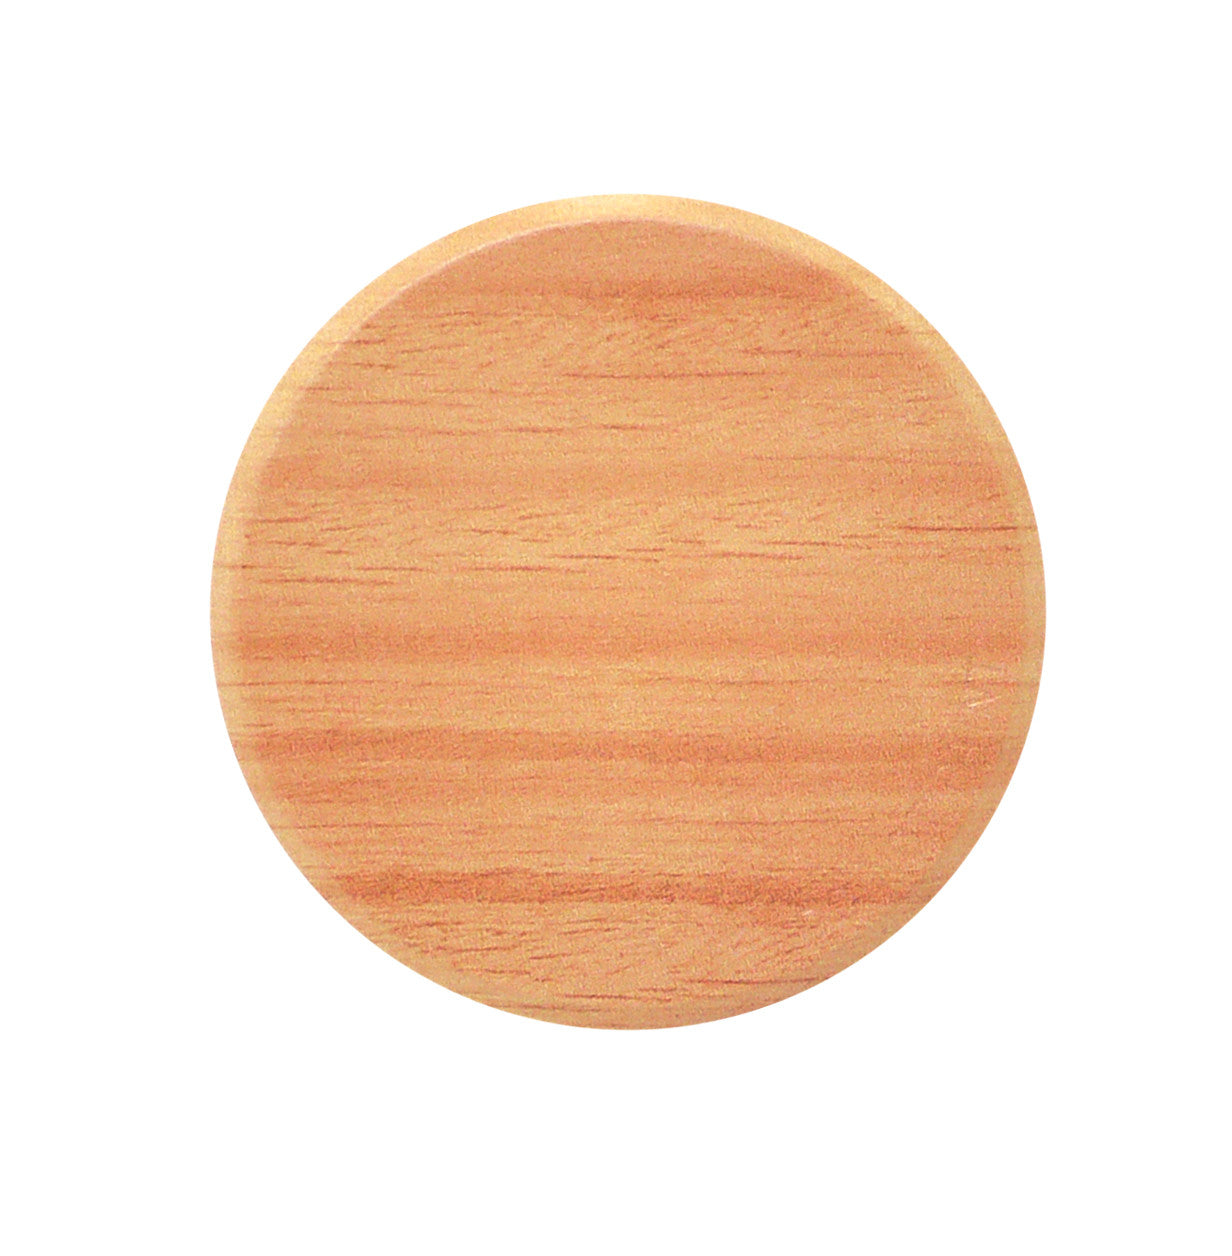 Cover Plate for CN Sprinklers, Residential/Commercial, 2-3/8" Yellow Birch